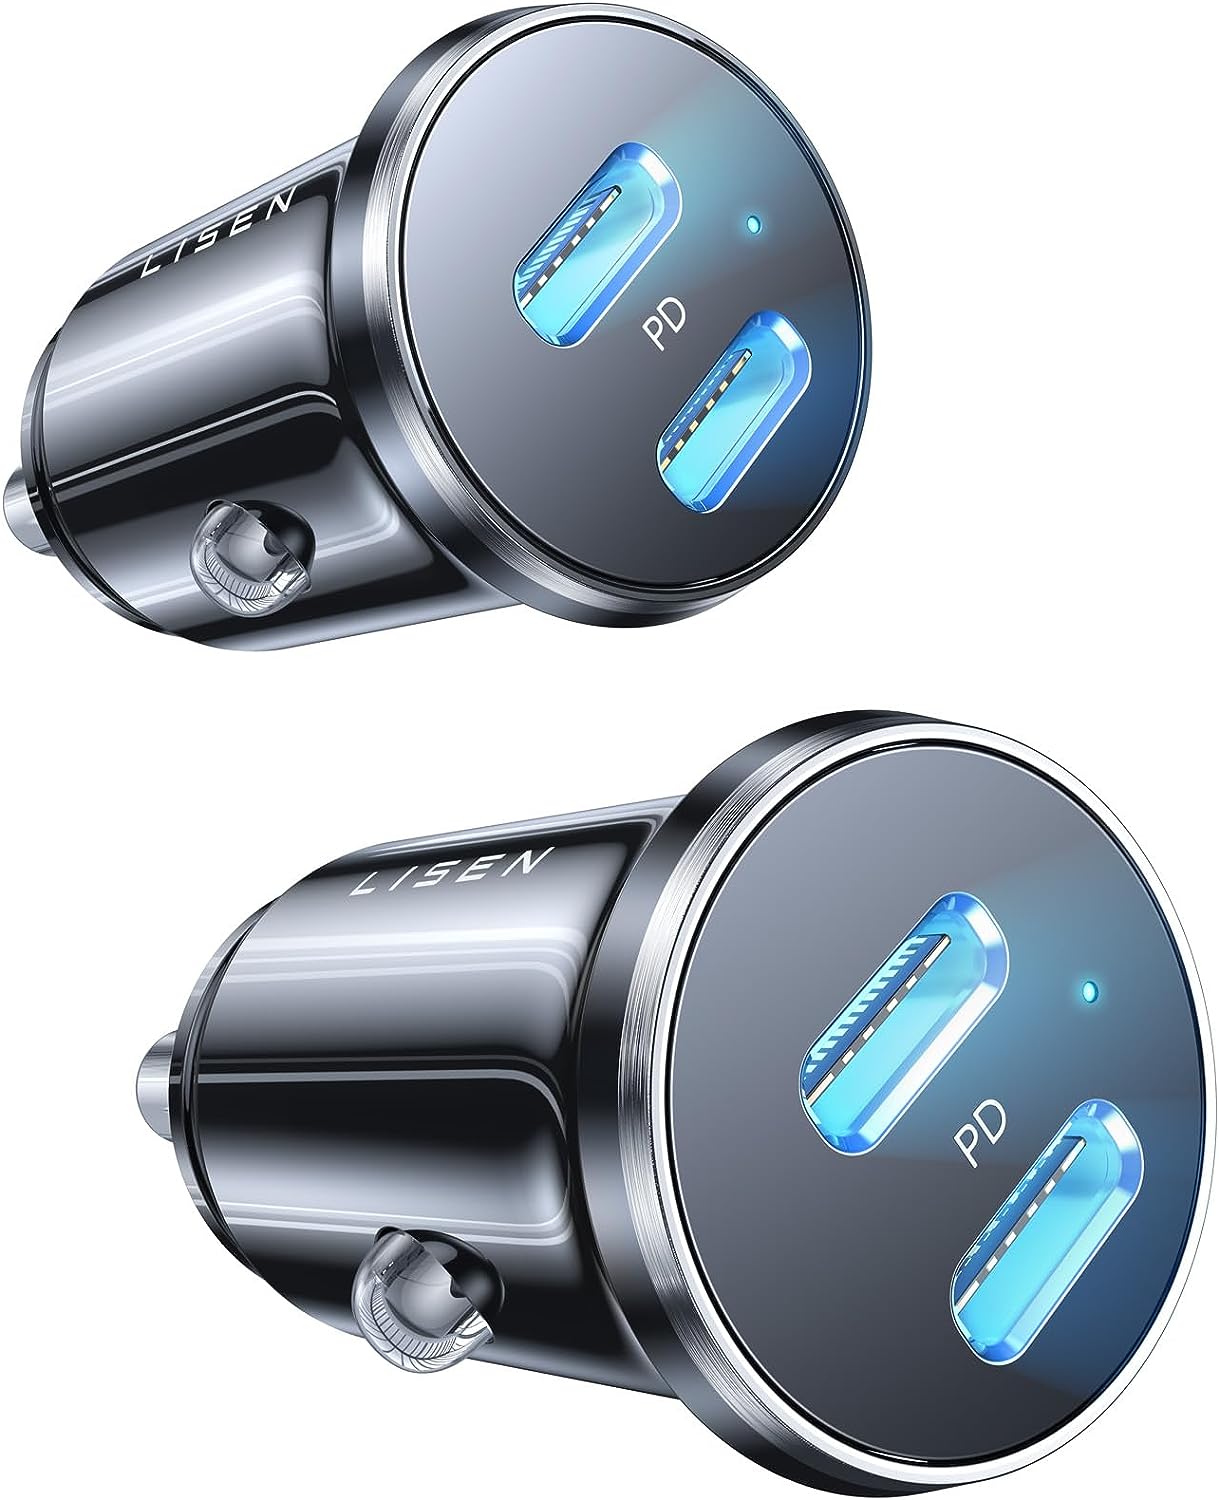 LISEN 2-Pack USB C Car Charger, Dual 30W+30W Car Charger USB C Fast Charging All Metal $14.99